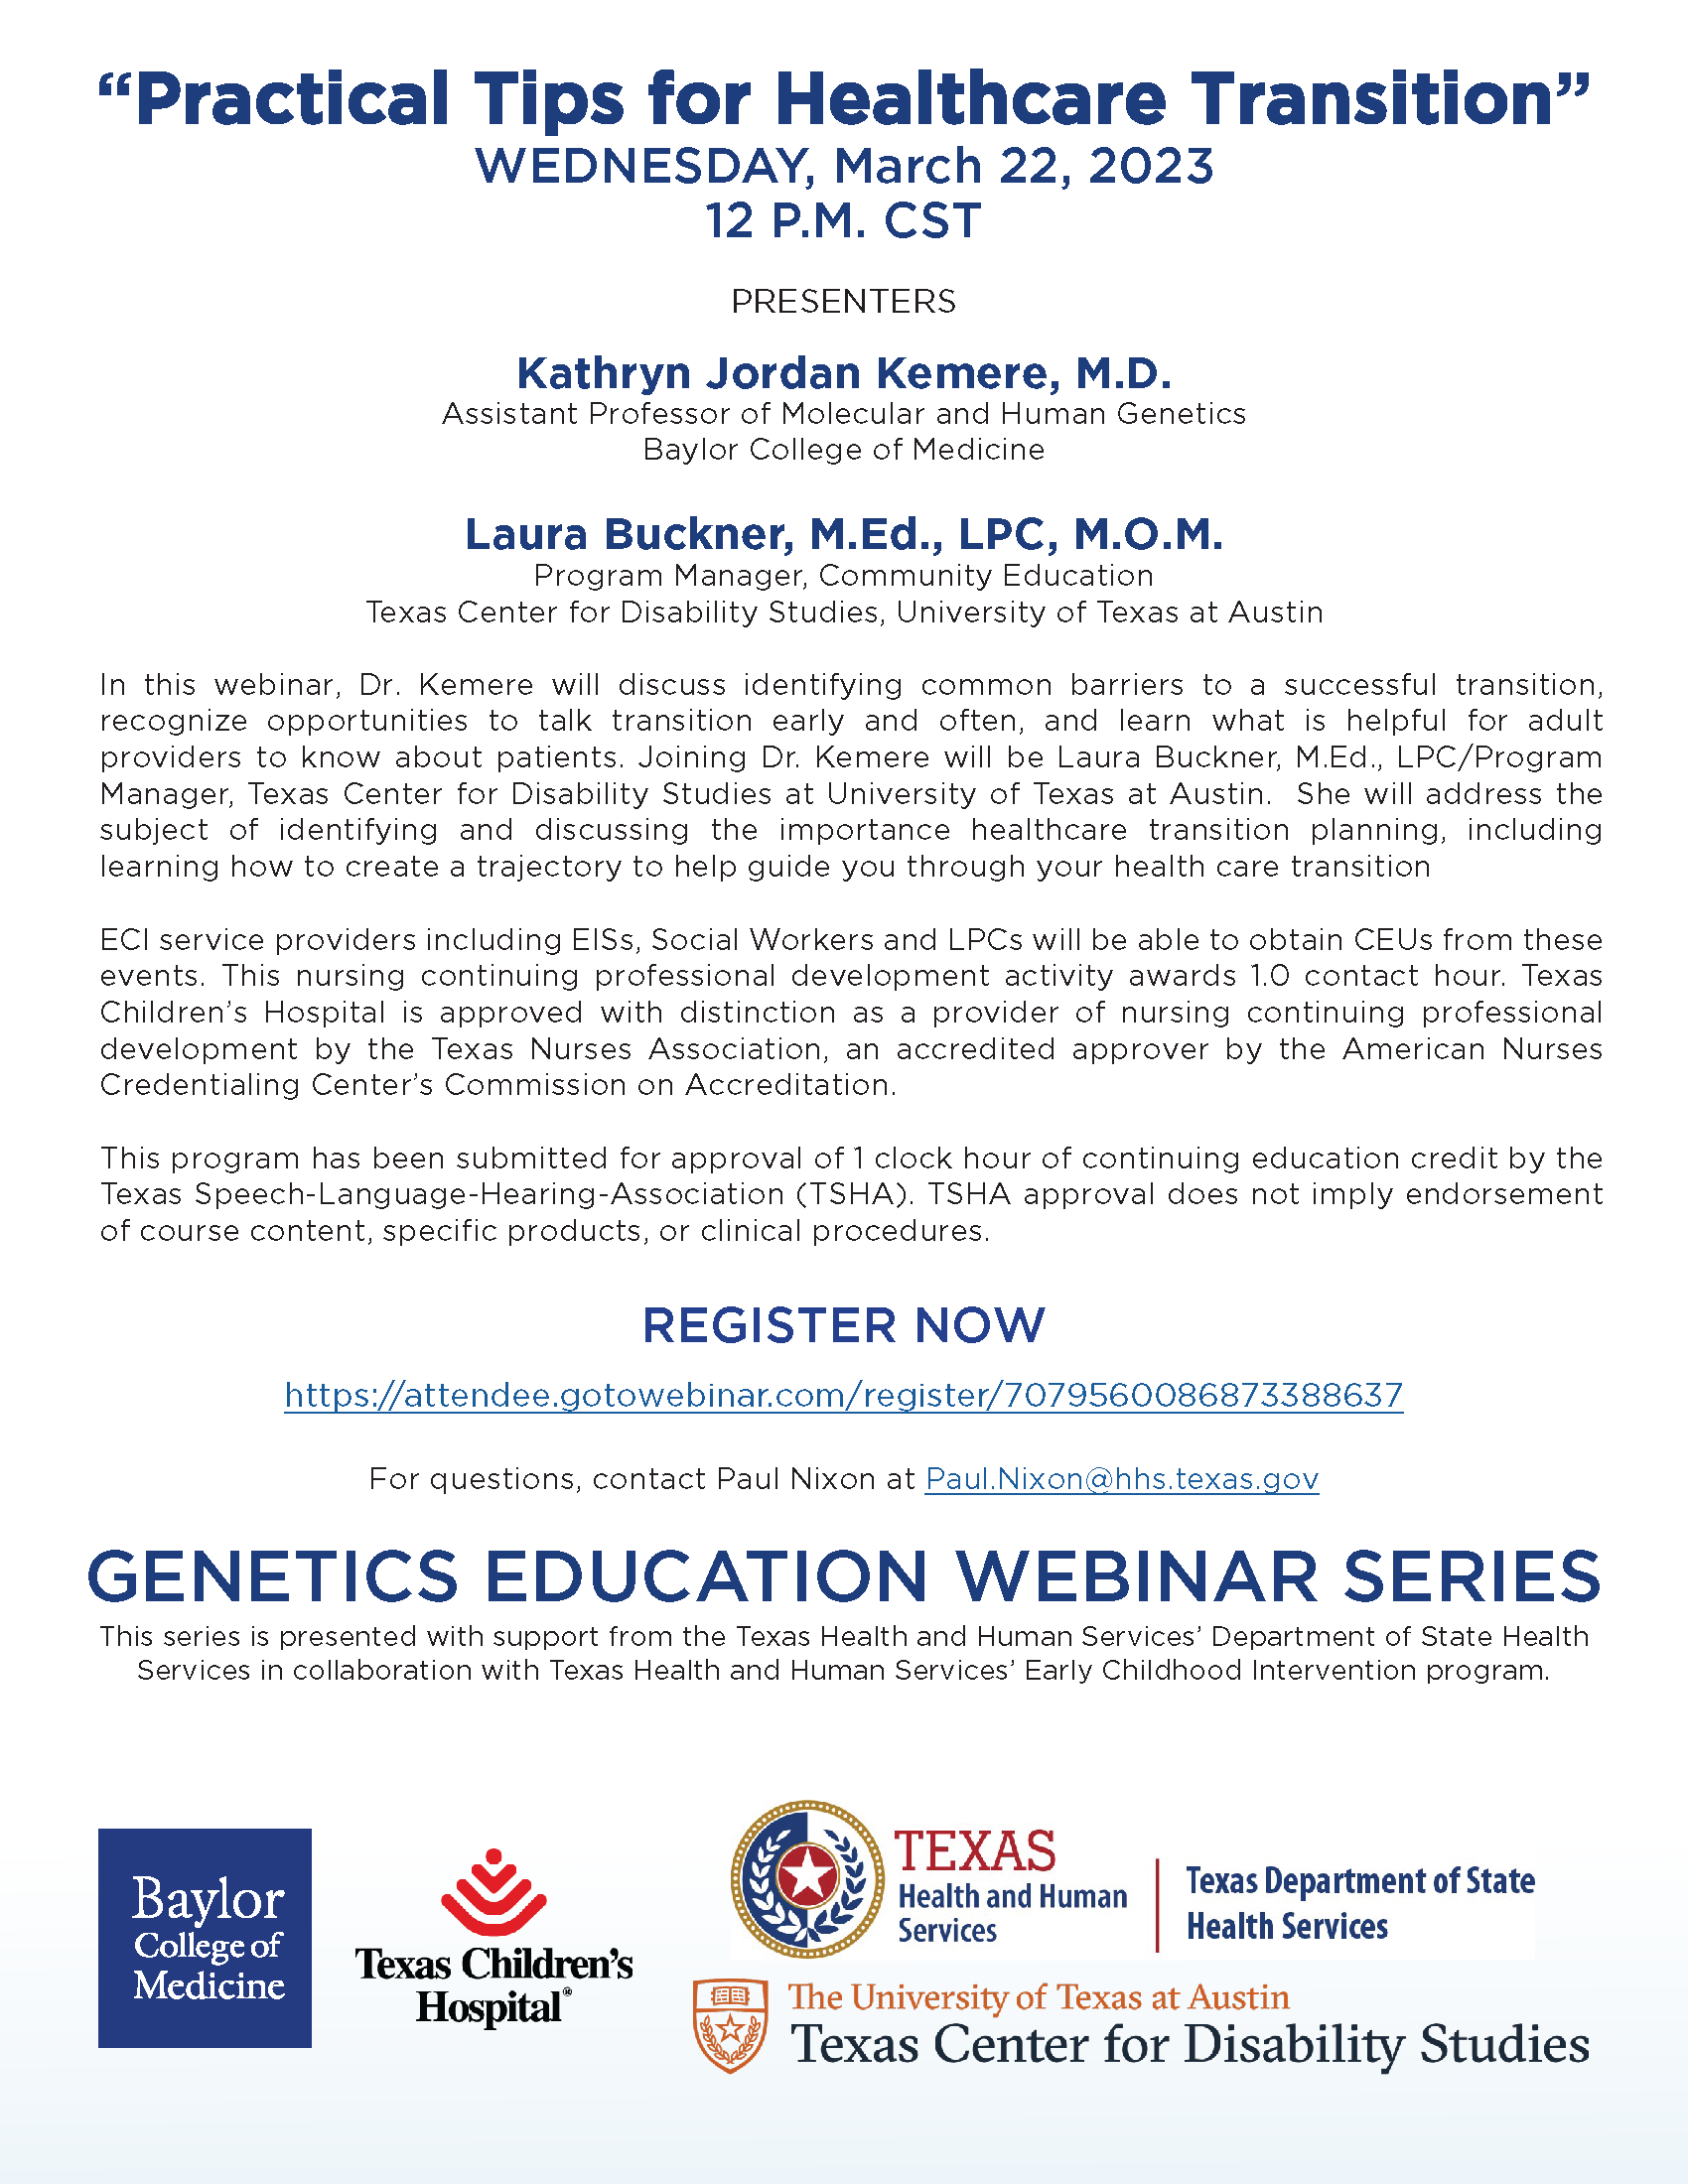 Flyer for Genetics Education Webinar to be held on Wednesday, March 22nd at 12:00PM CST; REGISTER: https://attendee.gotowebinar.com/register/7079560086873388637